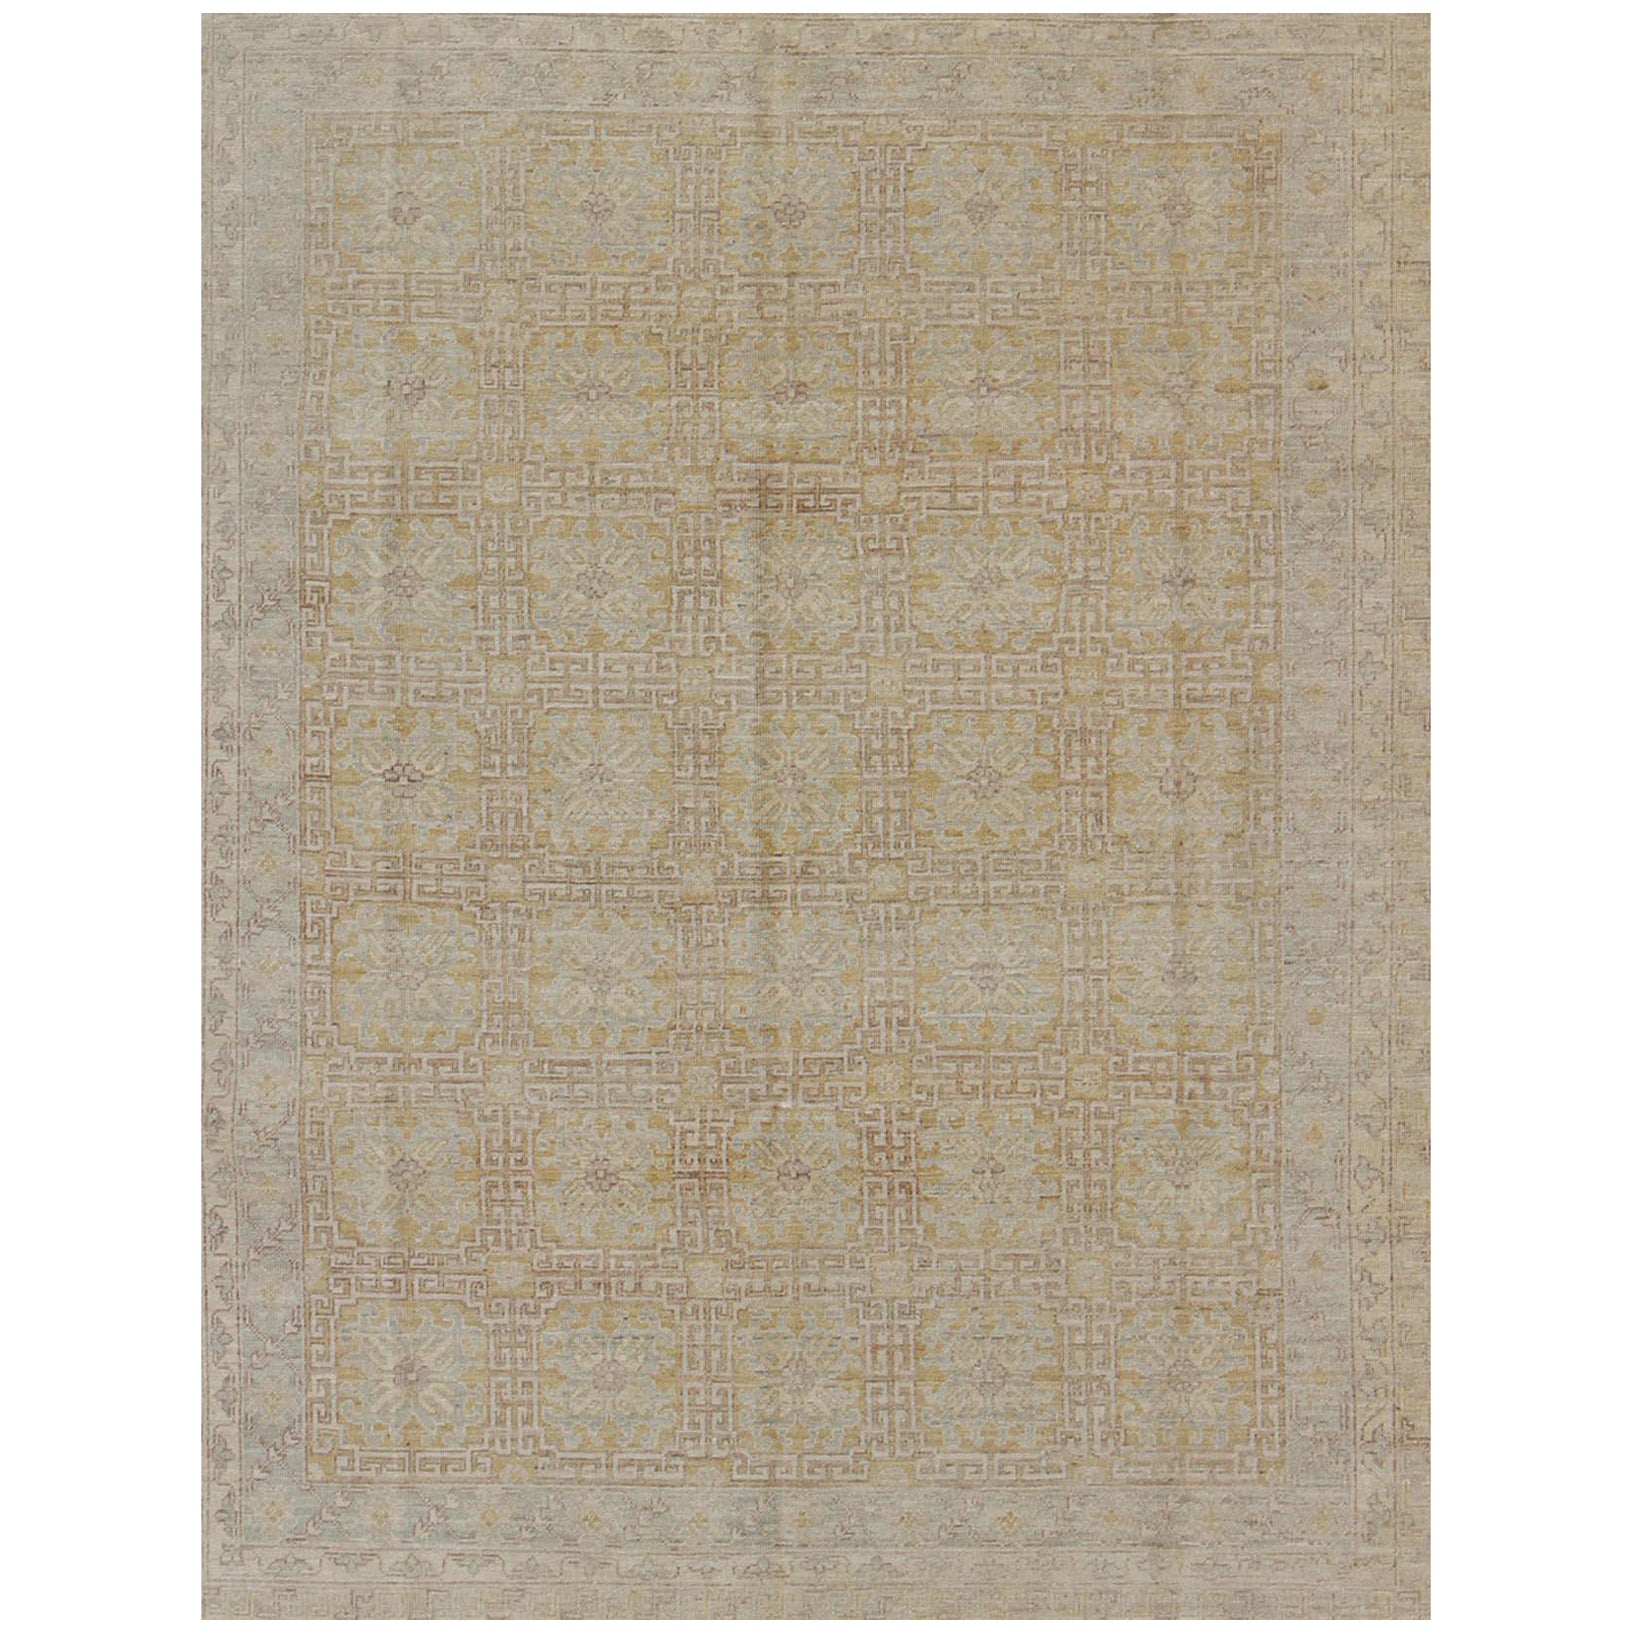 Khotan Style Rug with All-Over Pattern in Gold, Light Brown, Chartreuse, Gray